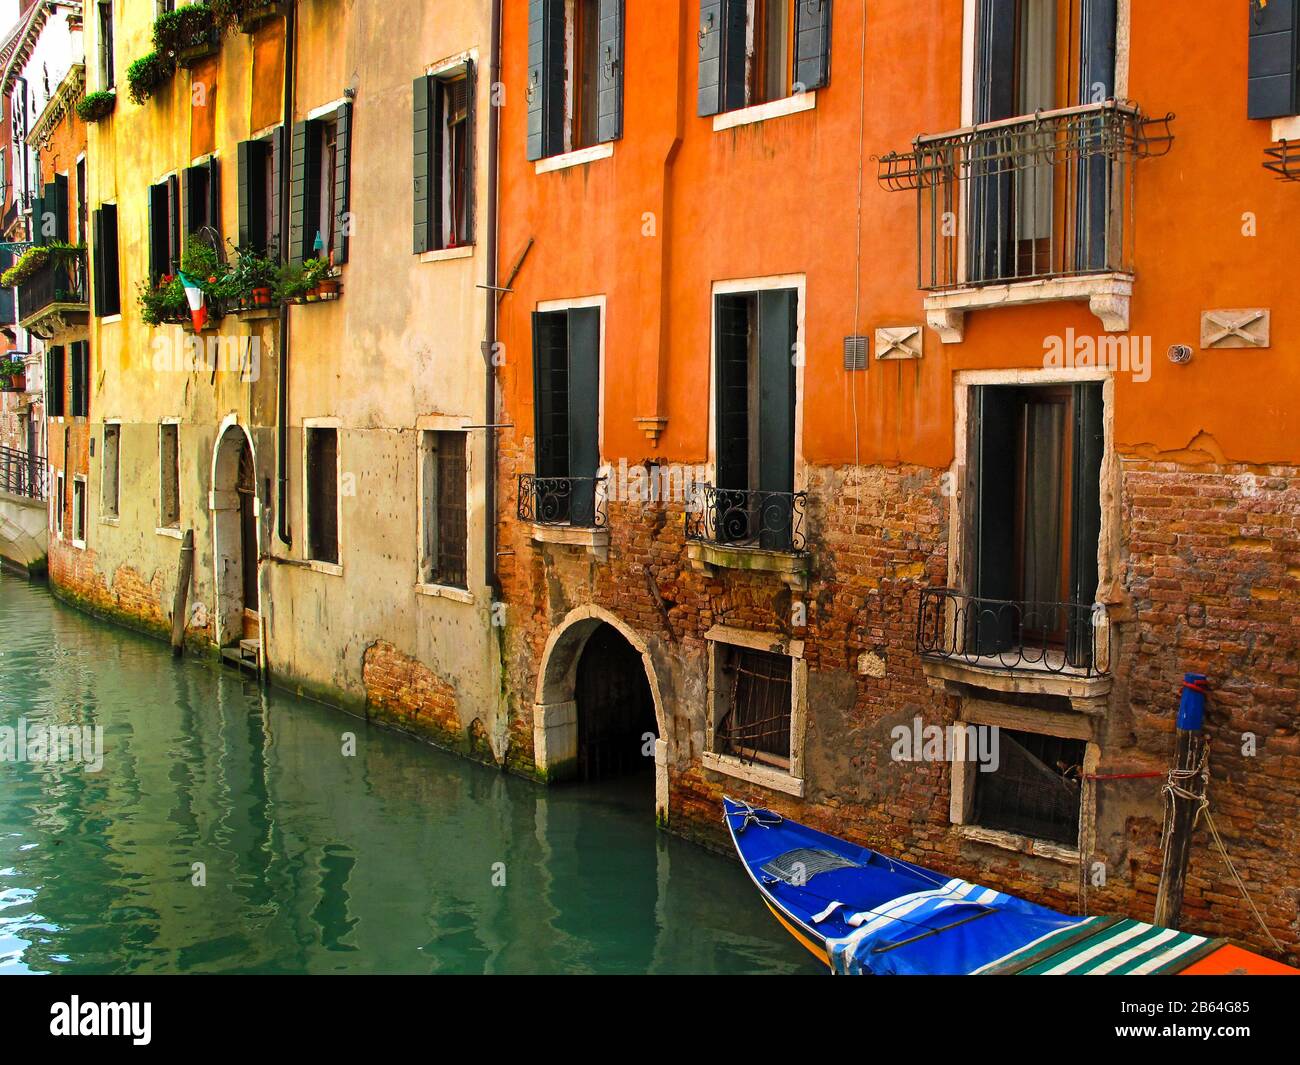 Canal street of Venice with orange painted houses and venetian boat tied to old building. Italy Stock Photo